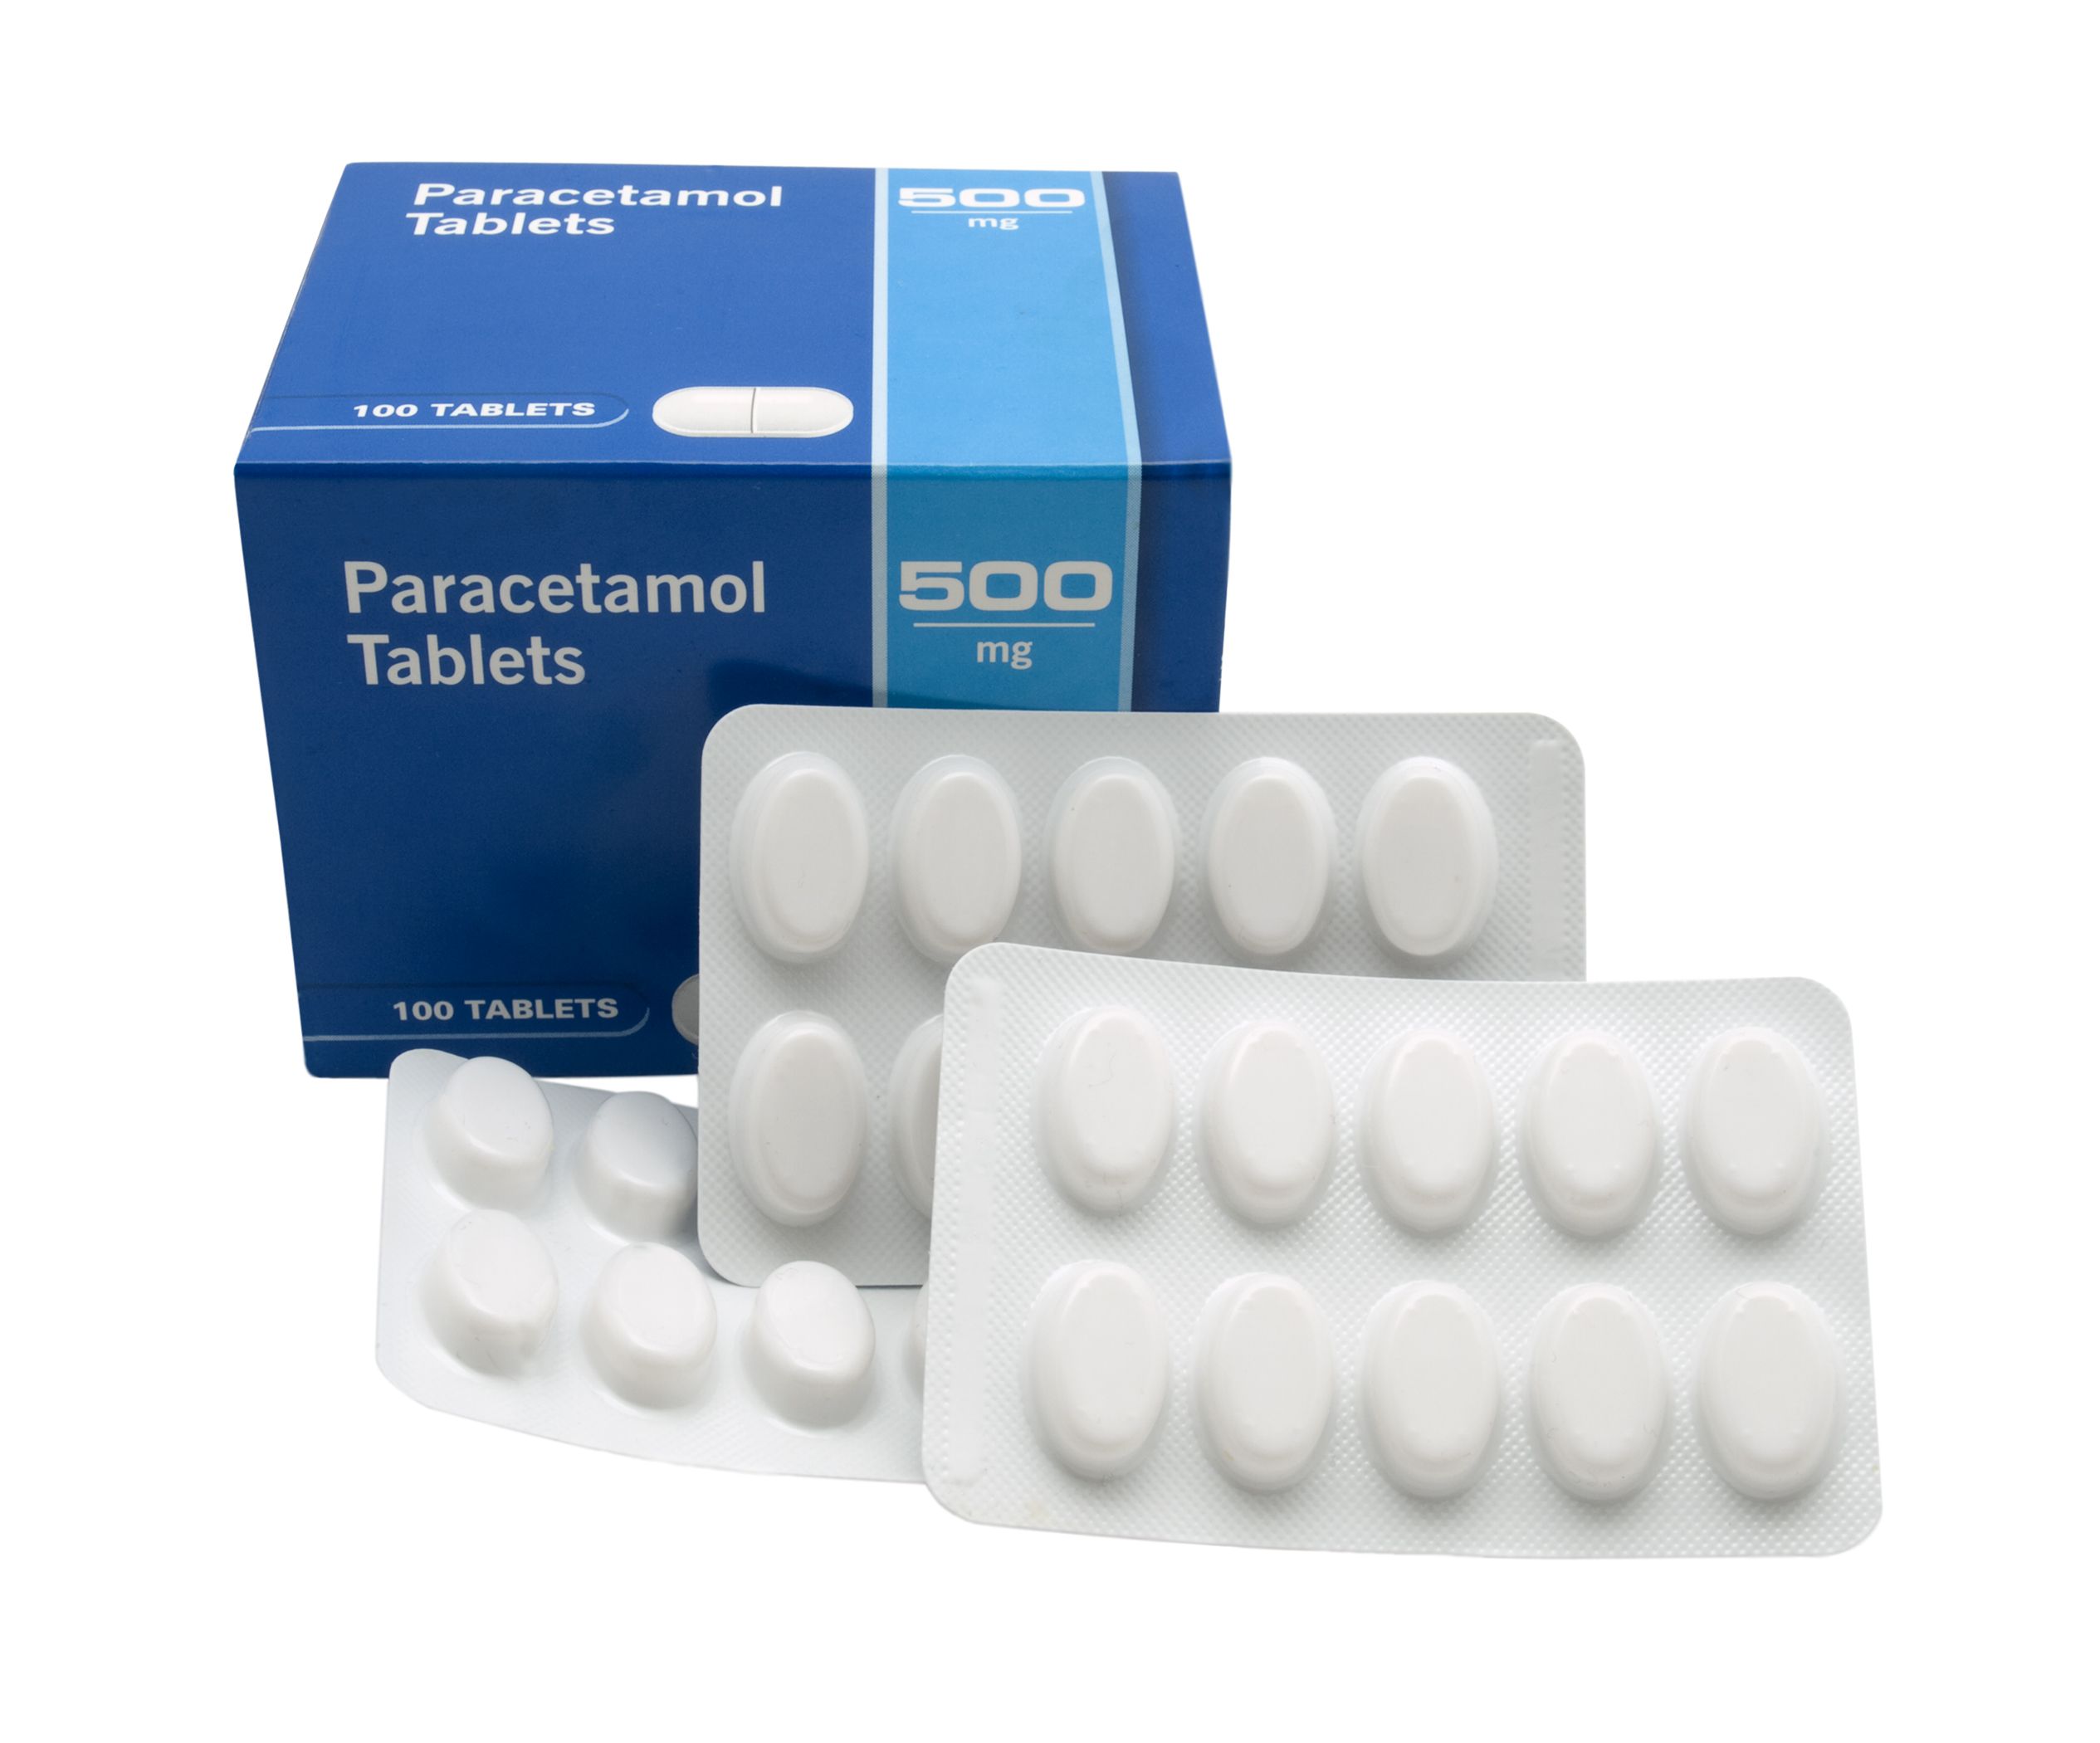 Paracetamol (acetaminophen): uses and mechanism of action